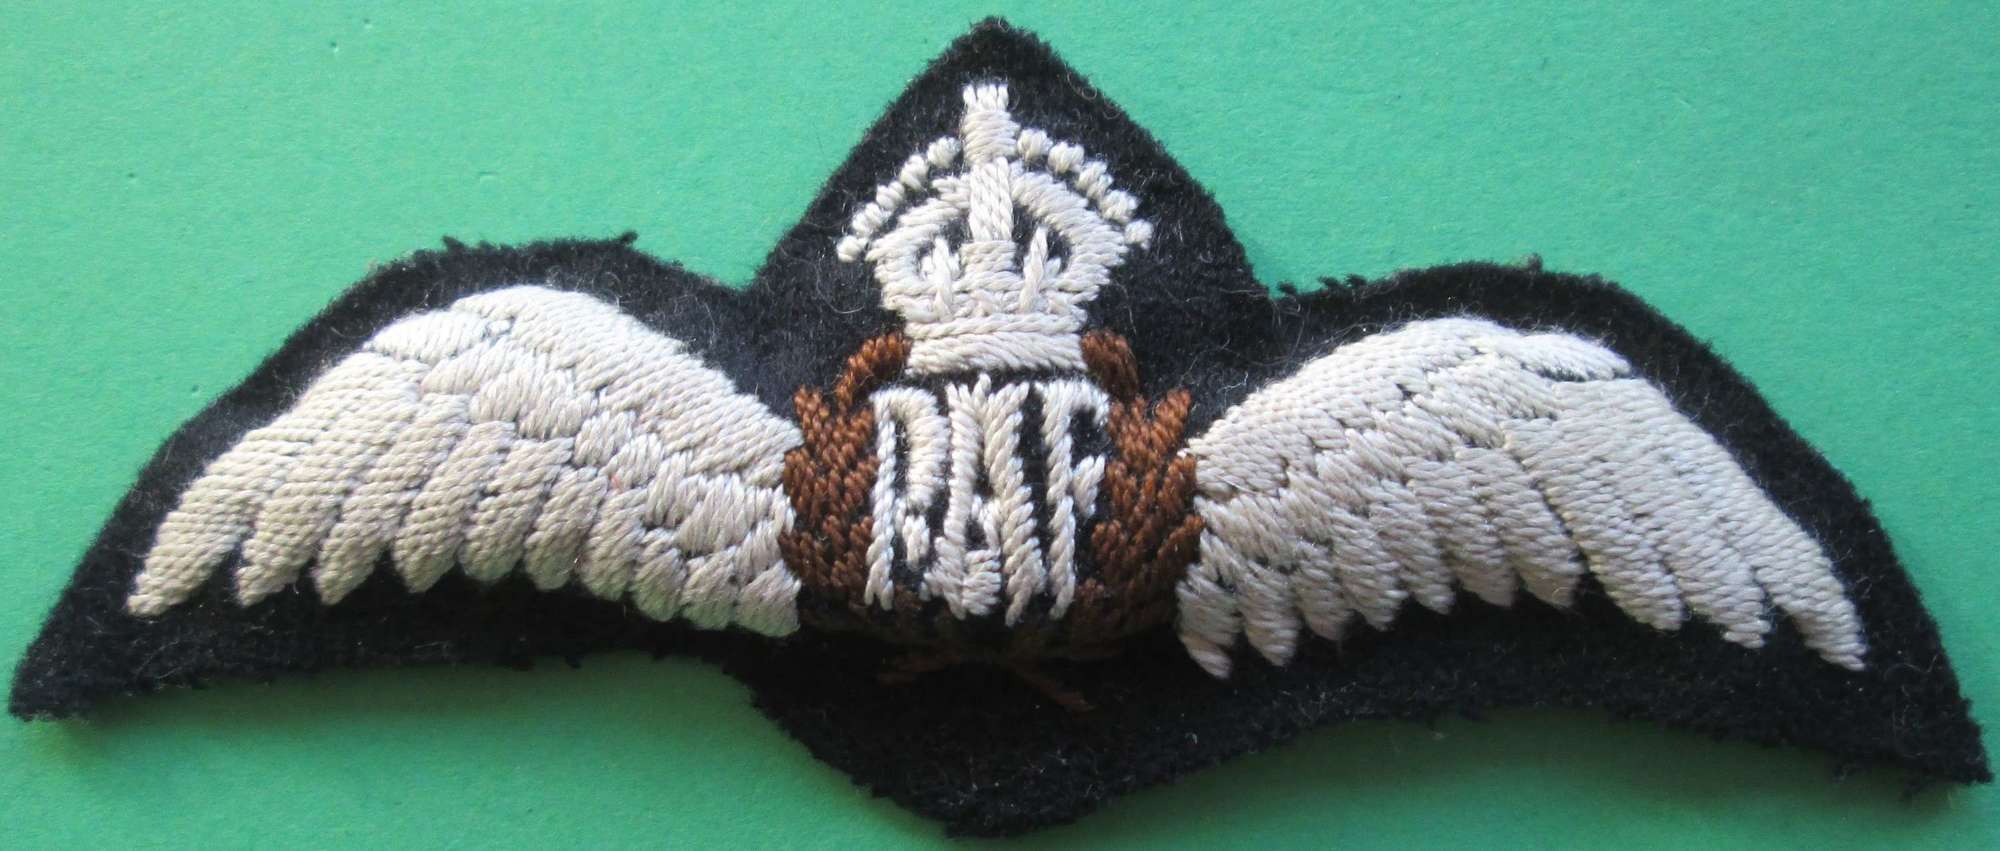 ROYAL AIR FORCE WWII PADDED WINGS